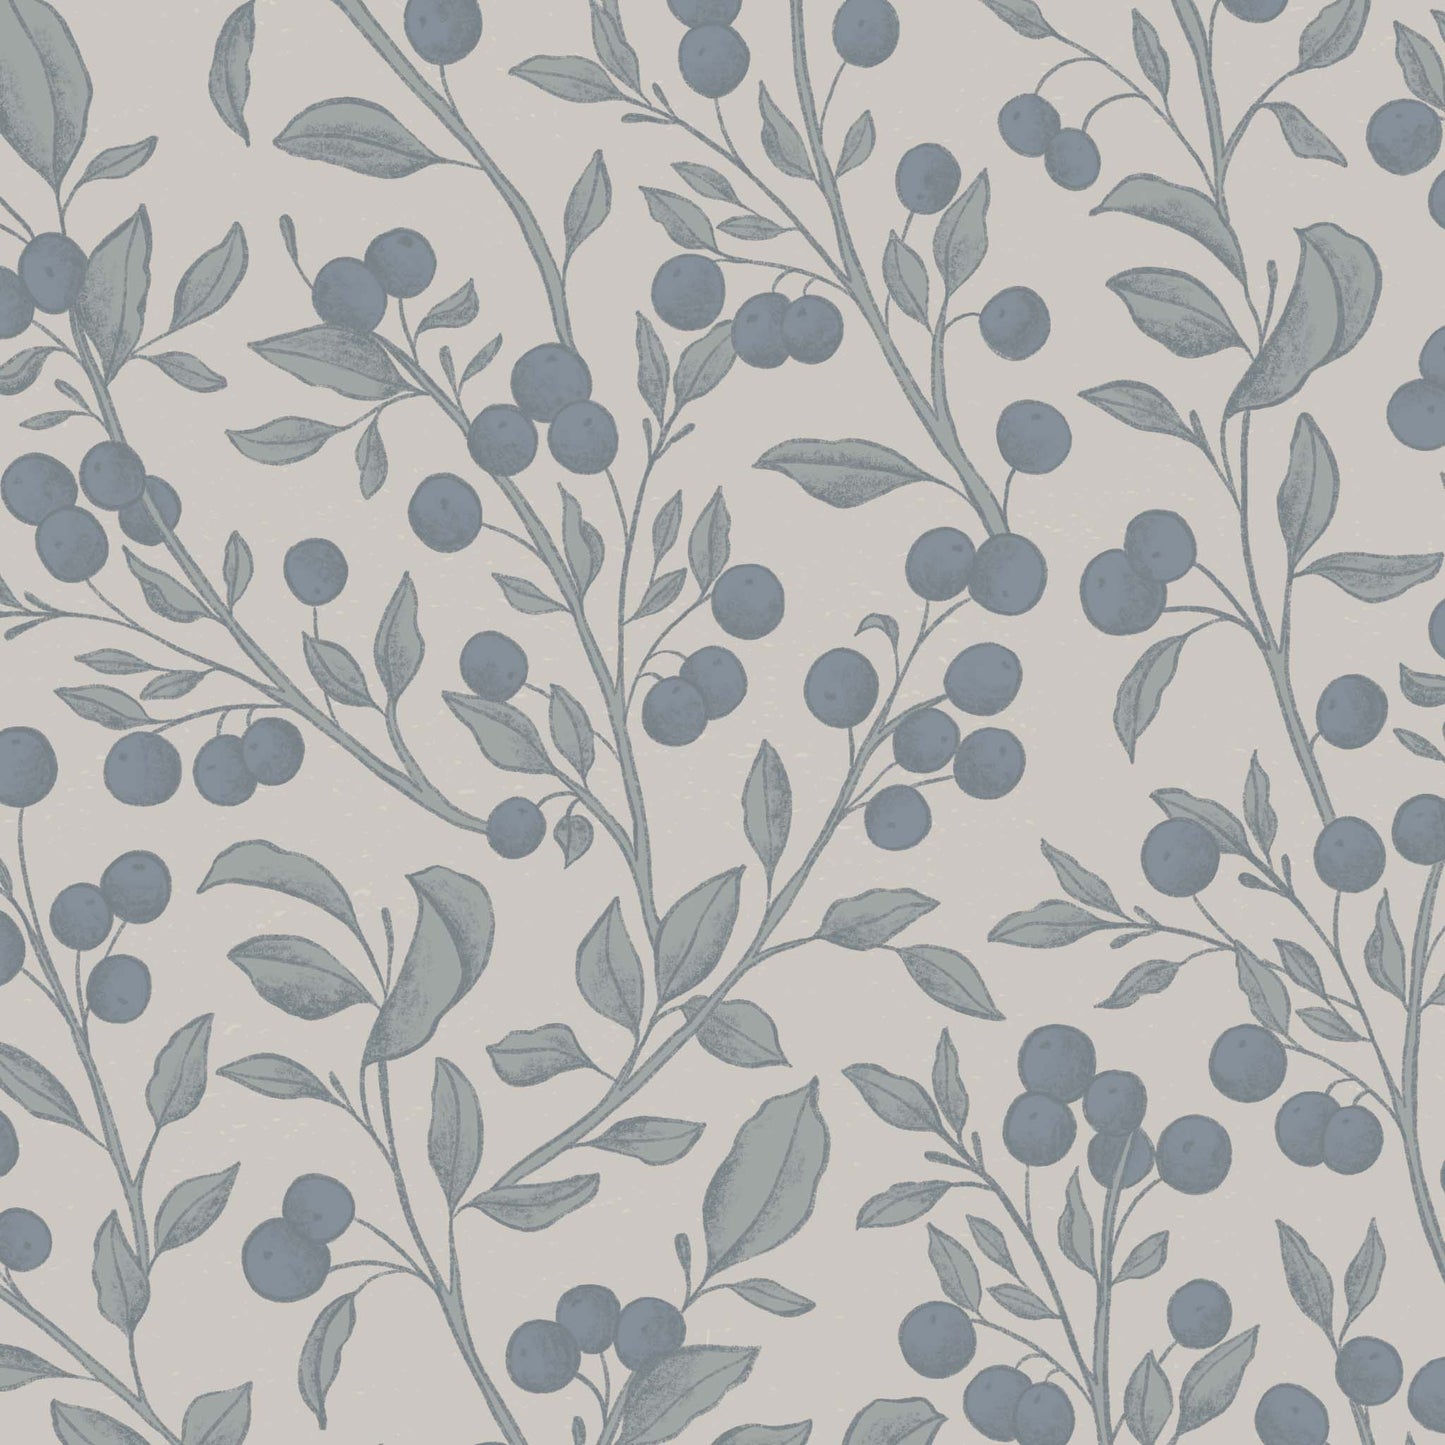 This close up view of our Berries Wallpaper in Gray and Blue shows our peel and stick, removable wallpaper with hand-drawn sketched berries in gray and blue by artist Mariah Cottrell.